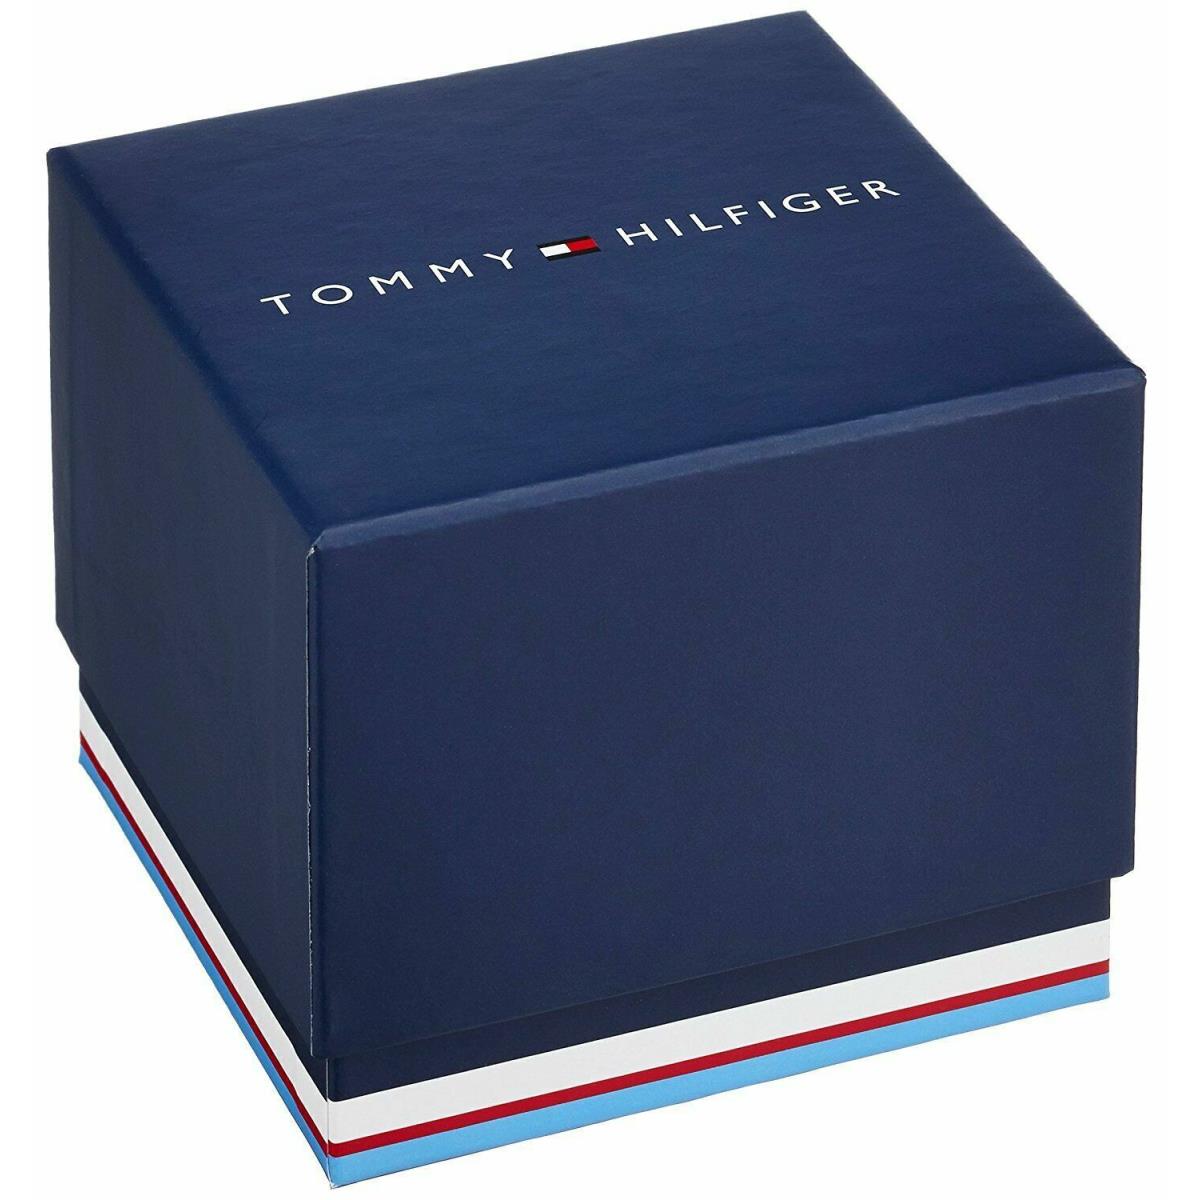 Tommy Hilfiger watch  - White Dial, Blue Band